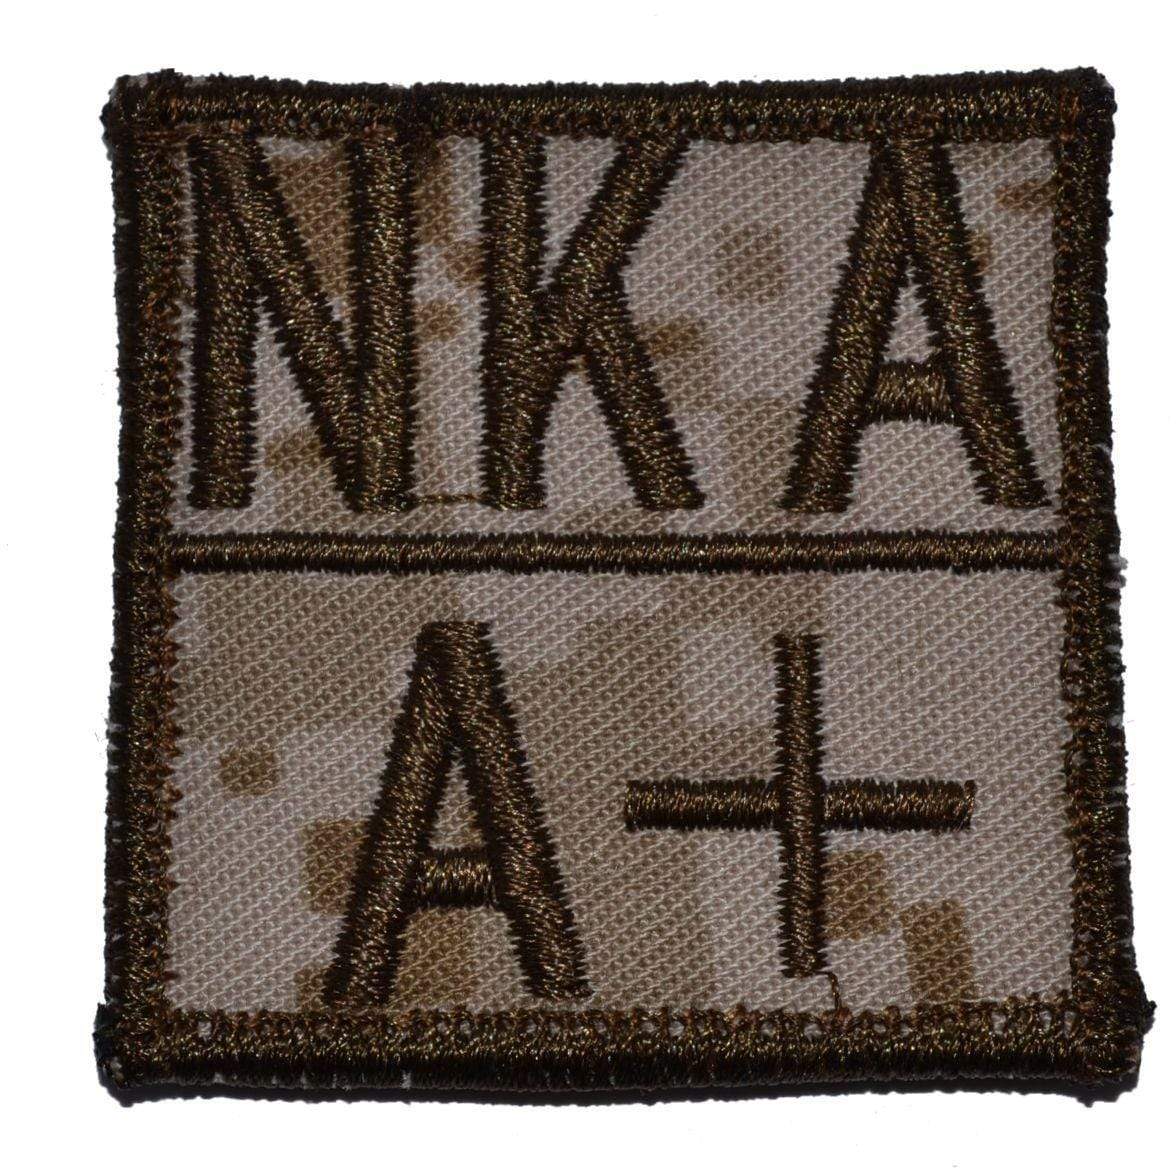 Tactical Gear Junkie Patches Blood Type and Allergy - 2x2 Patch